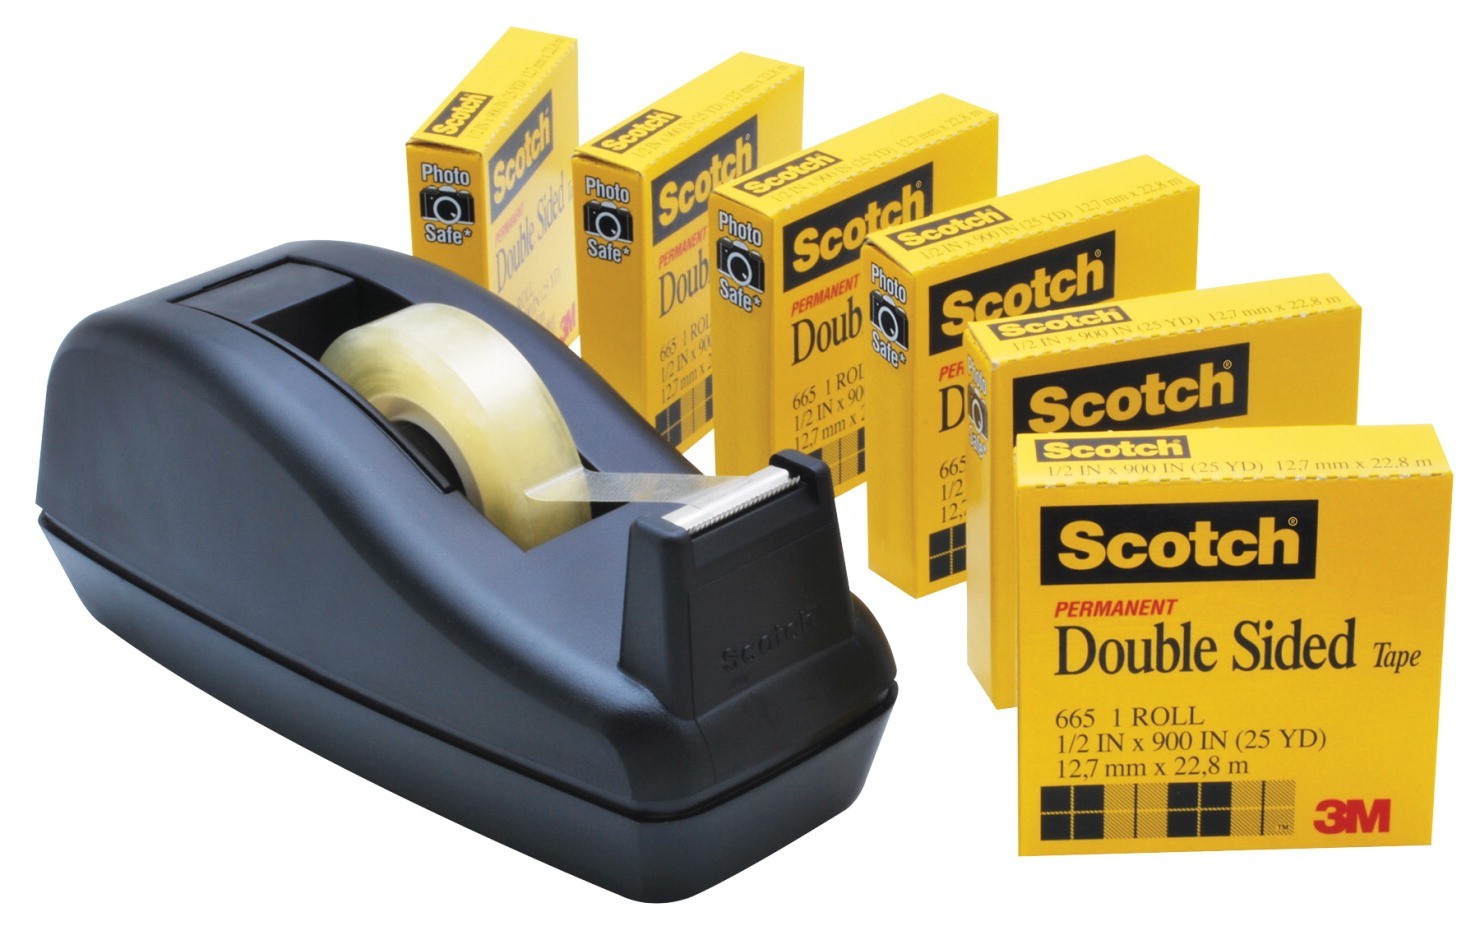 Scotch Double-Sided, Permanent Tape Applicator with 6 Tape Rolls, 1/2 X 900"